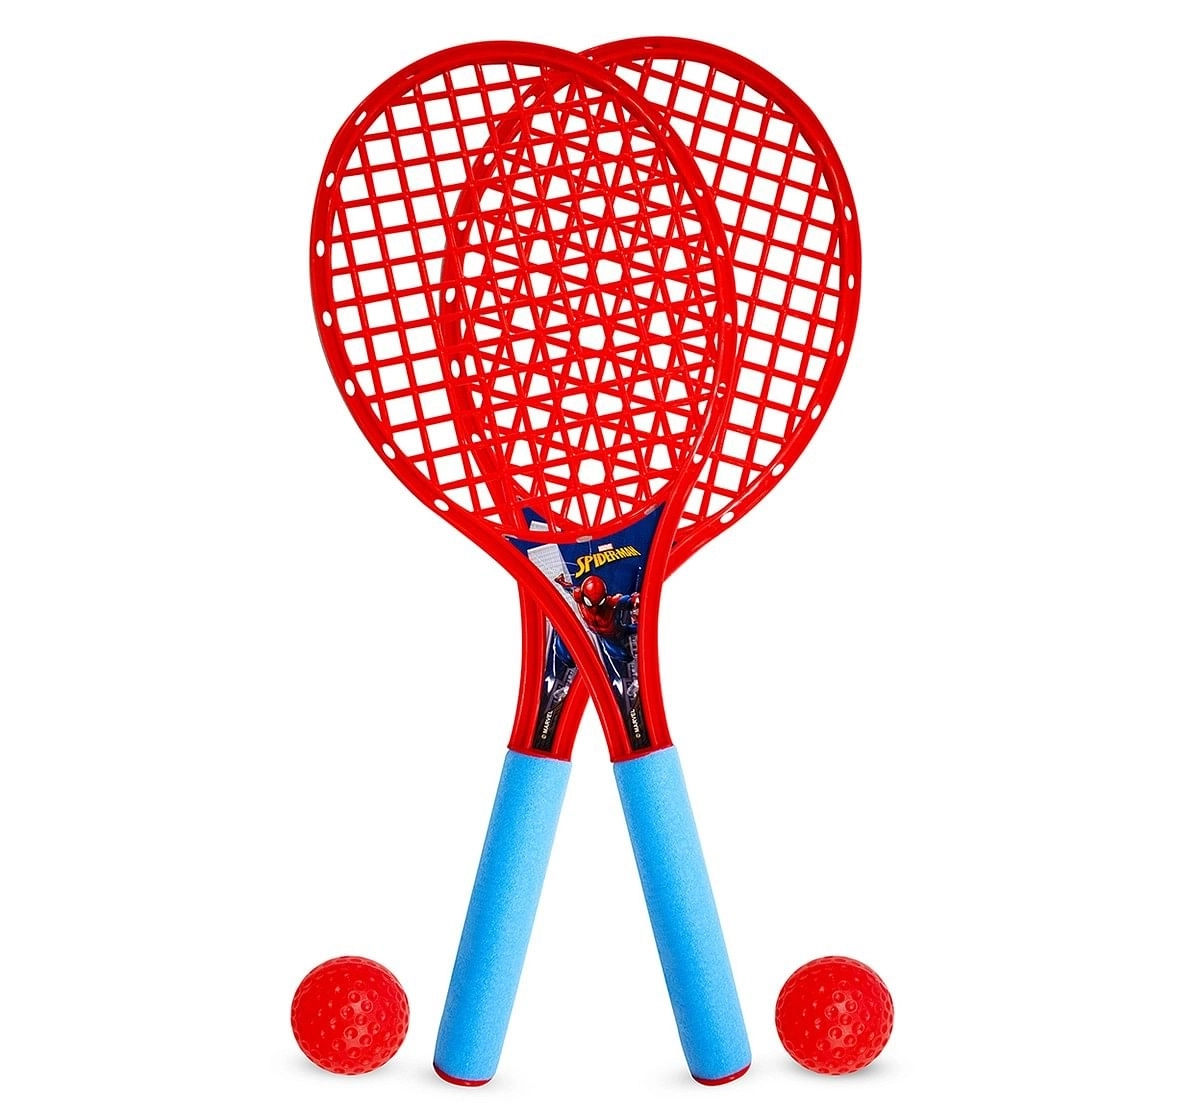 IToys Marvel Spiderman My first Beach racket set for kids,  3Y+(Multicolour)